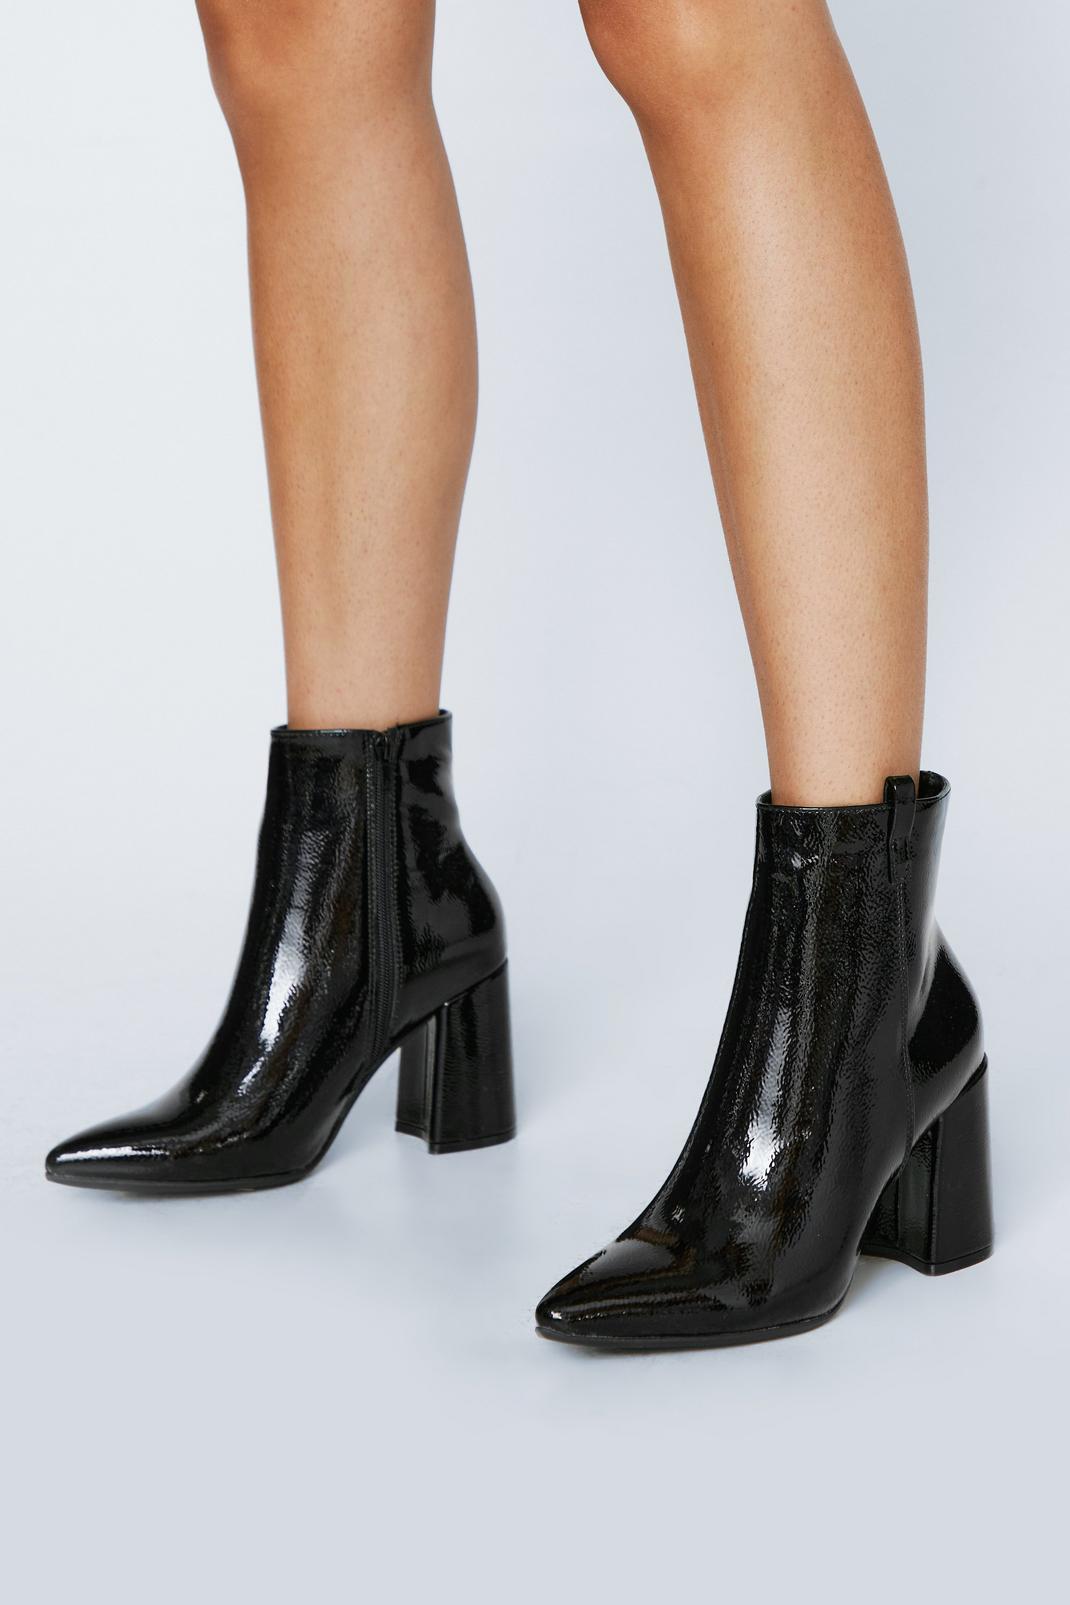 Patent Ankle Boots for Women - Up to 70% off